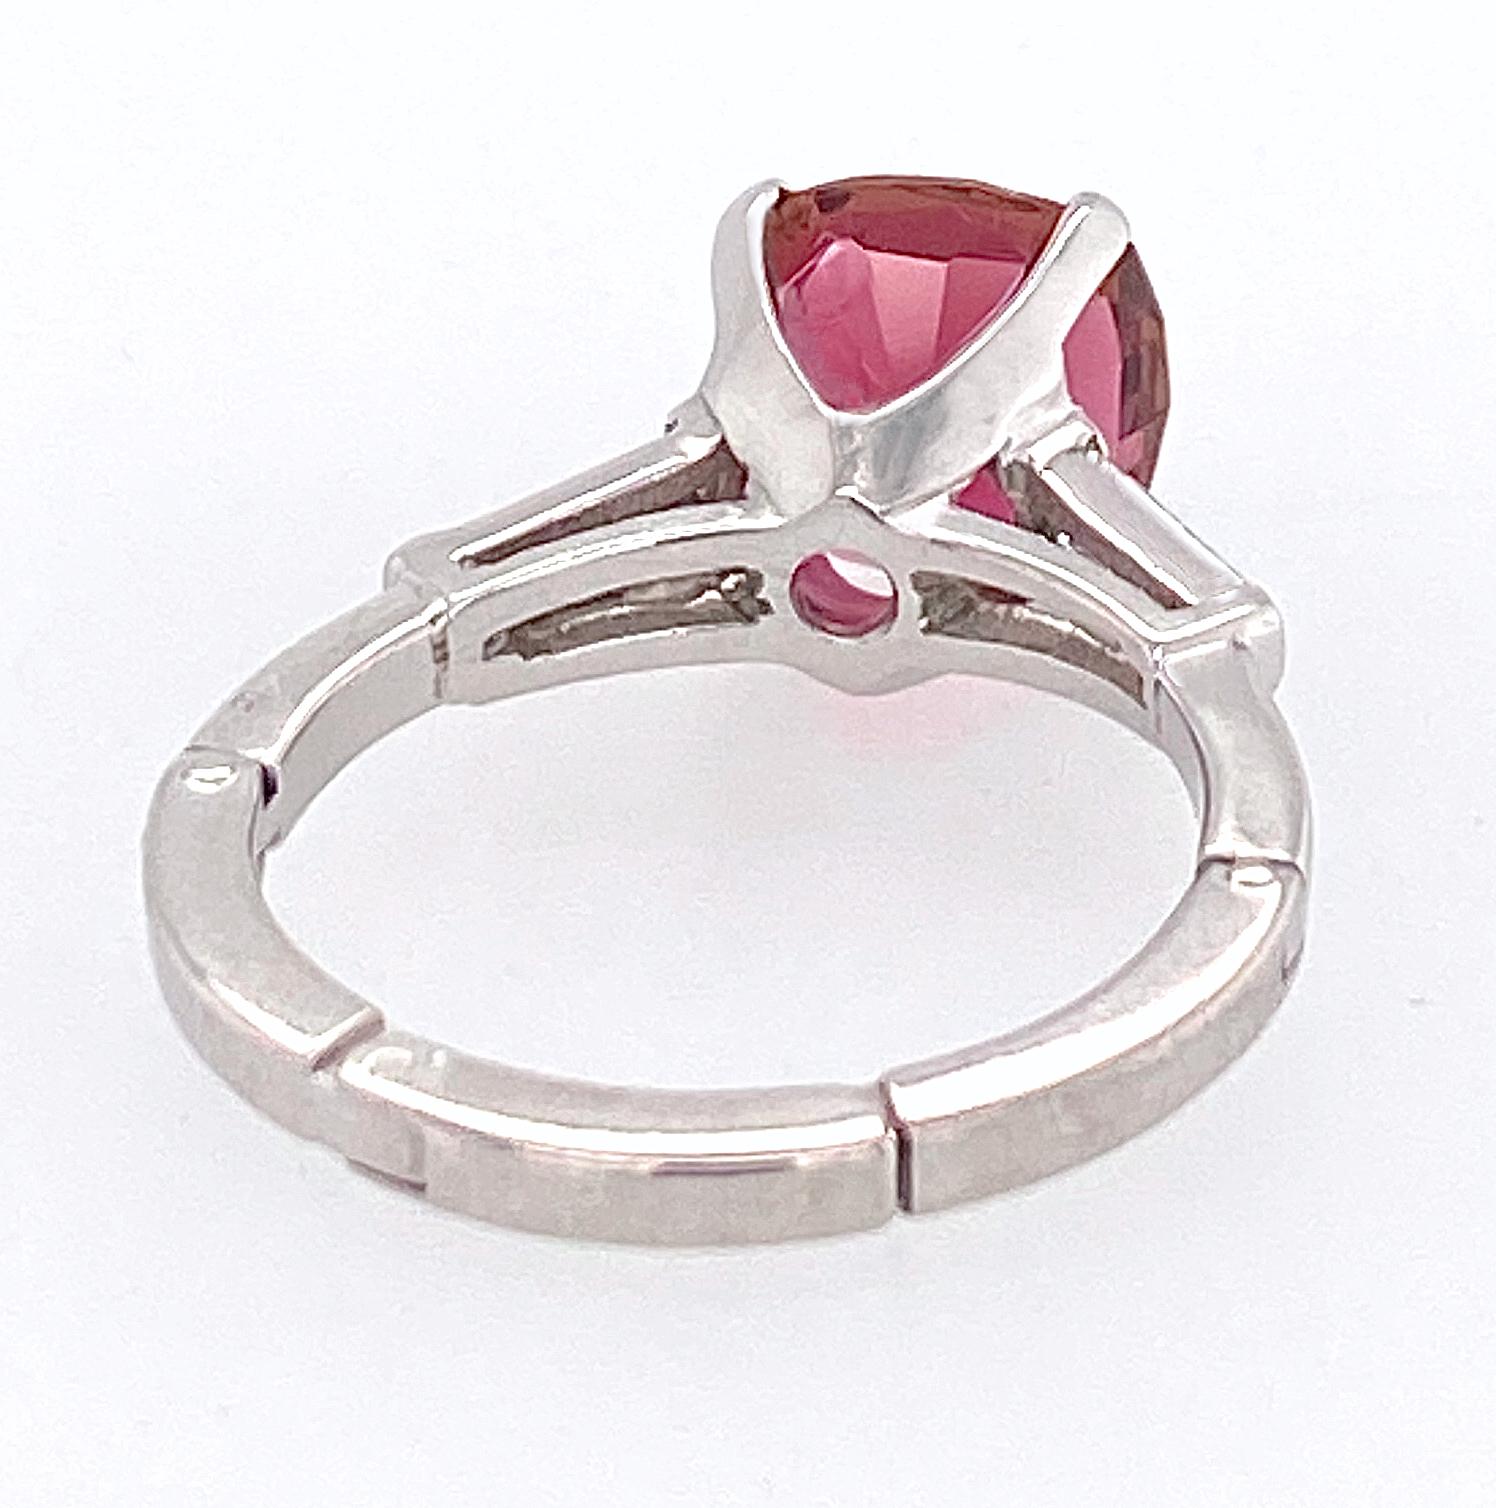 2.9 Carat Pink Tourmaline Engagement Ring with Baguettes in Platinum & Gold For Sale 3